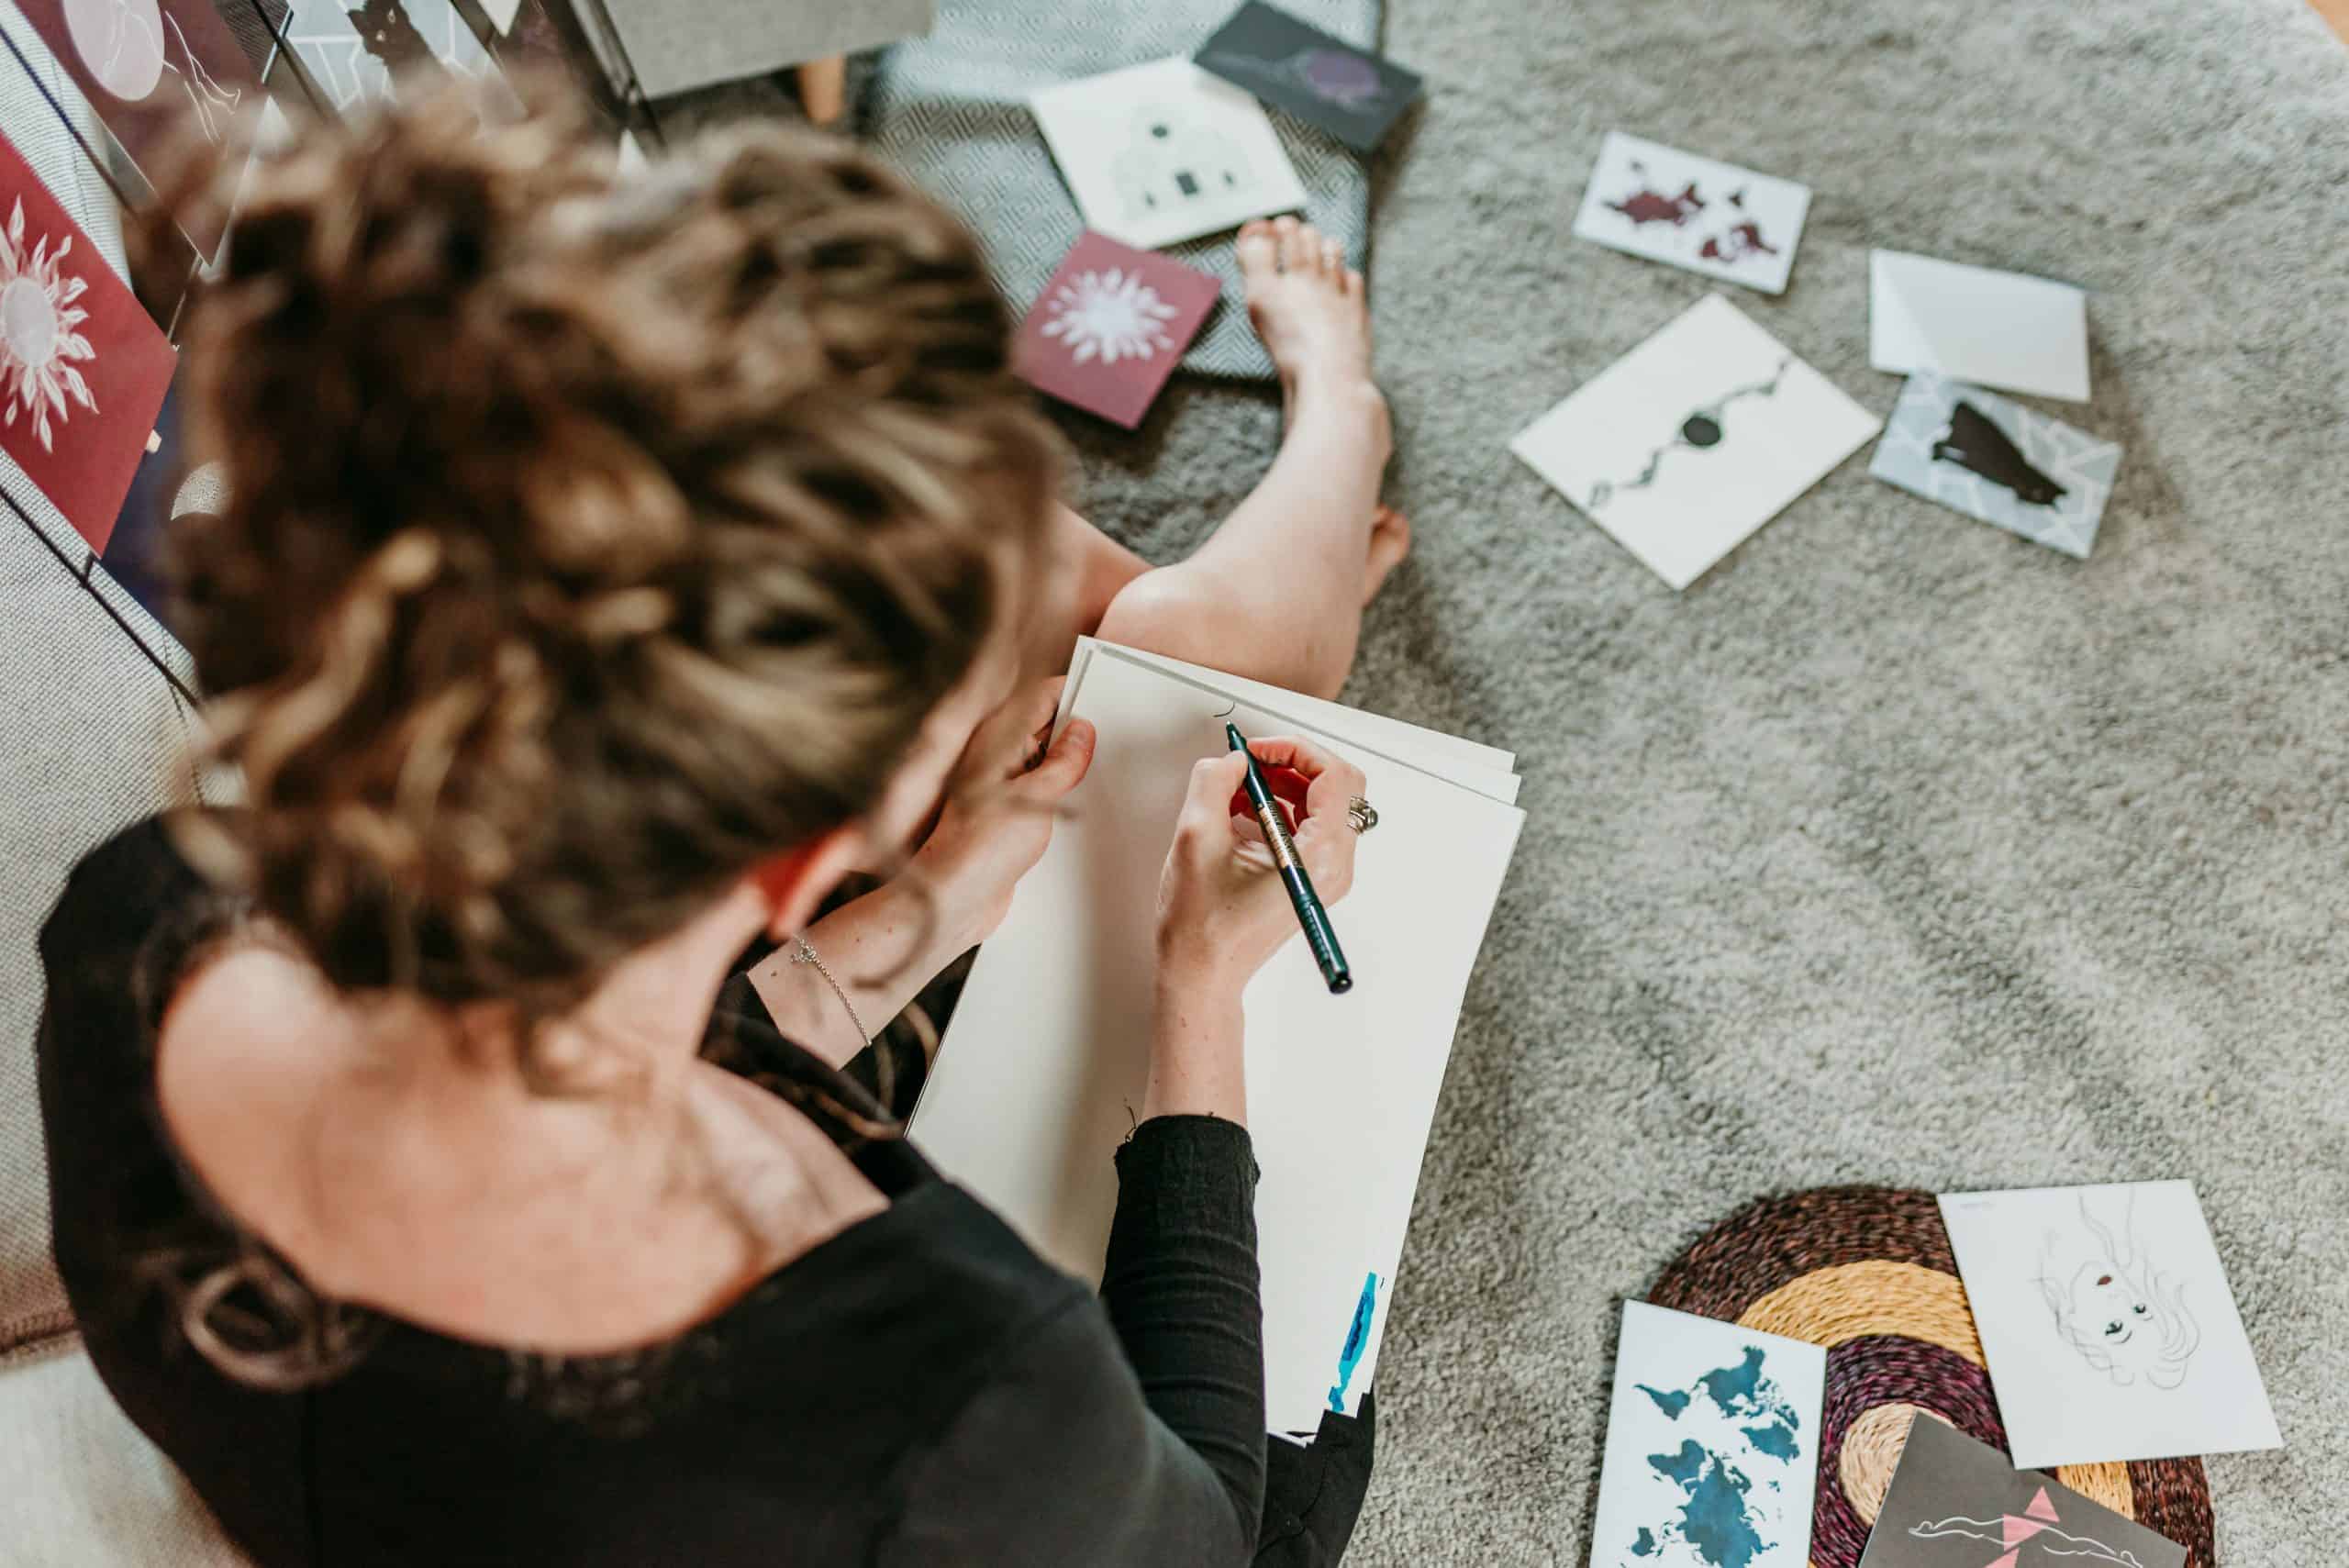 Heads Together. Image from above shows Tamzin sitting on the floor, drawing, with some of her artwork scattered around her.